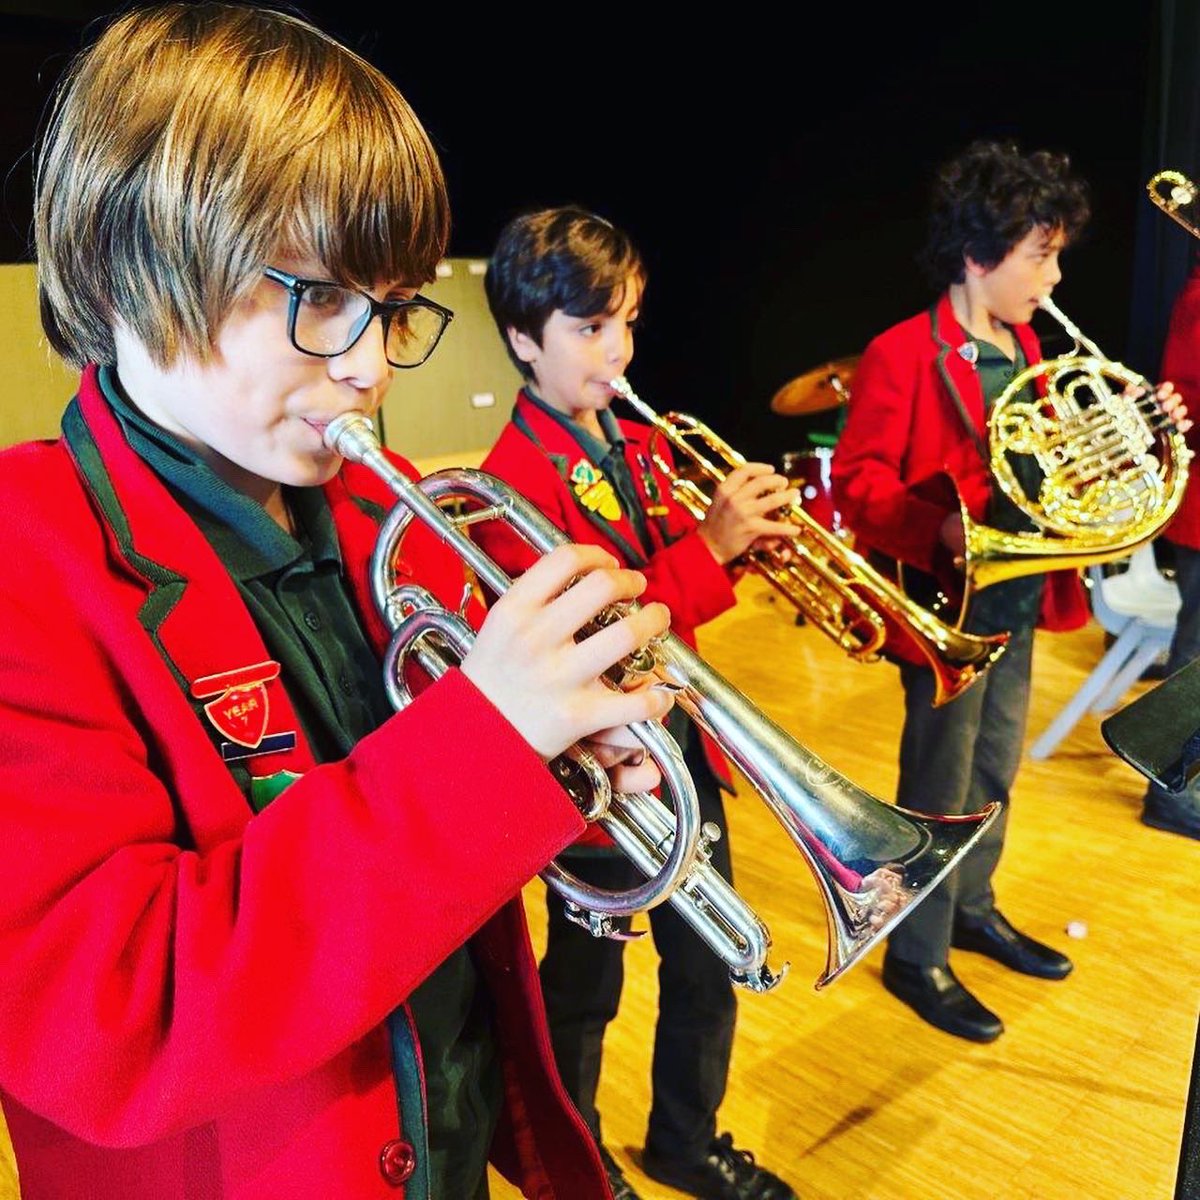 Earlier this week we enjoyed a Summer Soirée at Canons Park filled with a great variety of wonderful music group performances from the boys! #prepschoolmusic #schoolmusicgroups #arnoldhousemusic #musicalperformance #summerconcert #canonsparkactivitycentre #arnoldhouseschool